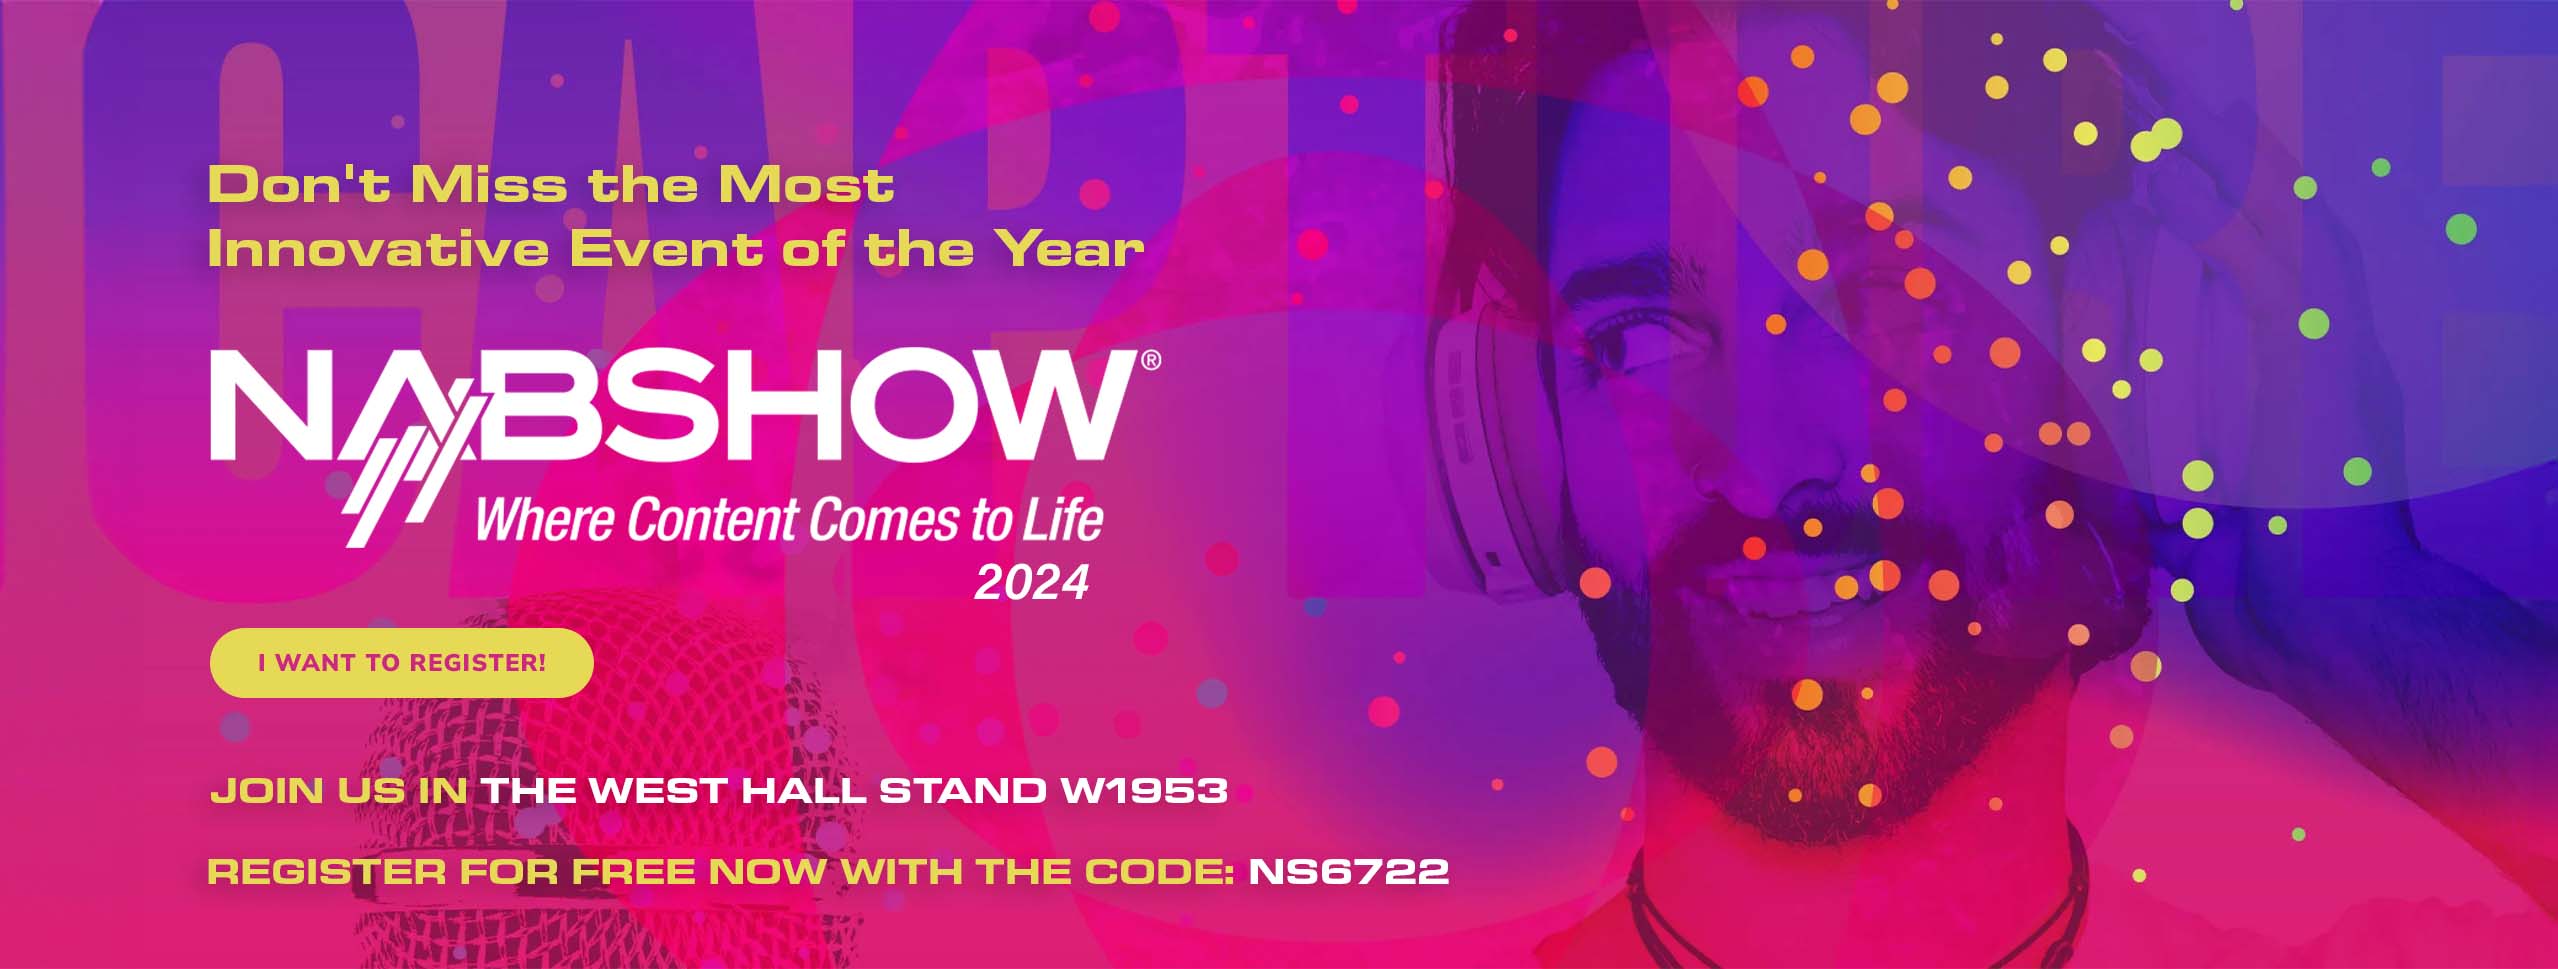 The image is a promotional banner in vibrant shades of pink and purple, with graphic elements such as dots and abstract shapes in yellow, green and orange. In the center, the NABSHOW® logo stands out, accompanied by the slogan Where Content Comes to Life 2024. On the left, there is an eye-catching button with text inviting to register: I want to register!. In addition, there is an offer to register for free with a code, NS6722, and a prompt to visit booth W1953 in the West Hall. On the right, there is a smiling man with headphones, suggesting a focus on audio or multimedia technology. The overall composition is dynamic and geared to appeal to professionals and enthusiasts in the audiovisual content industry.